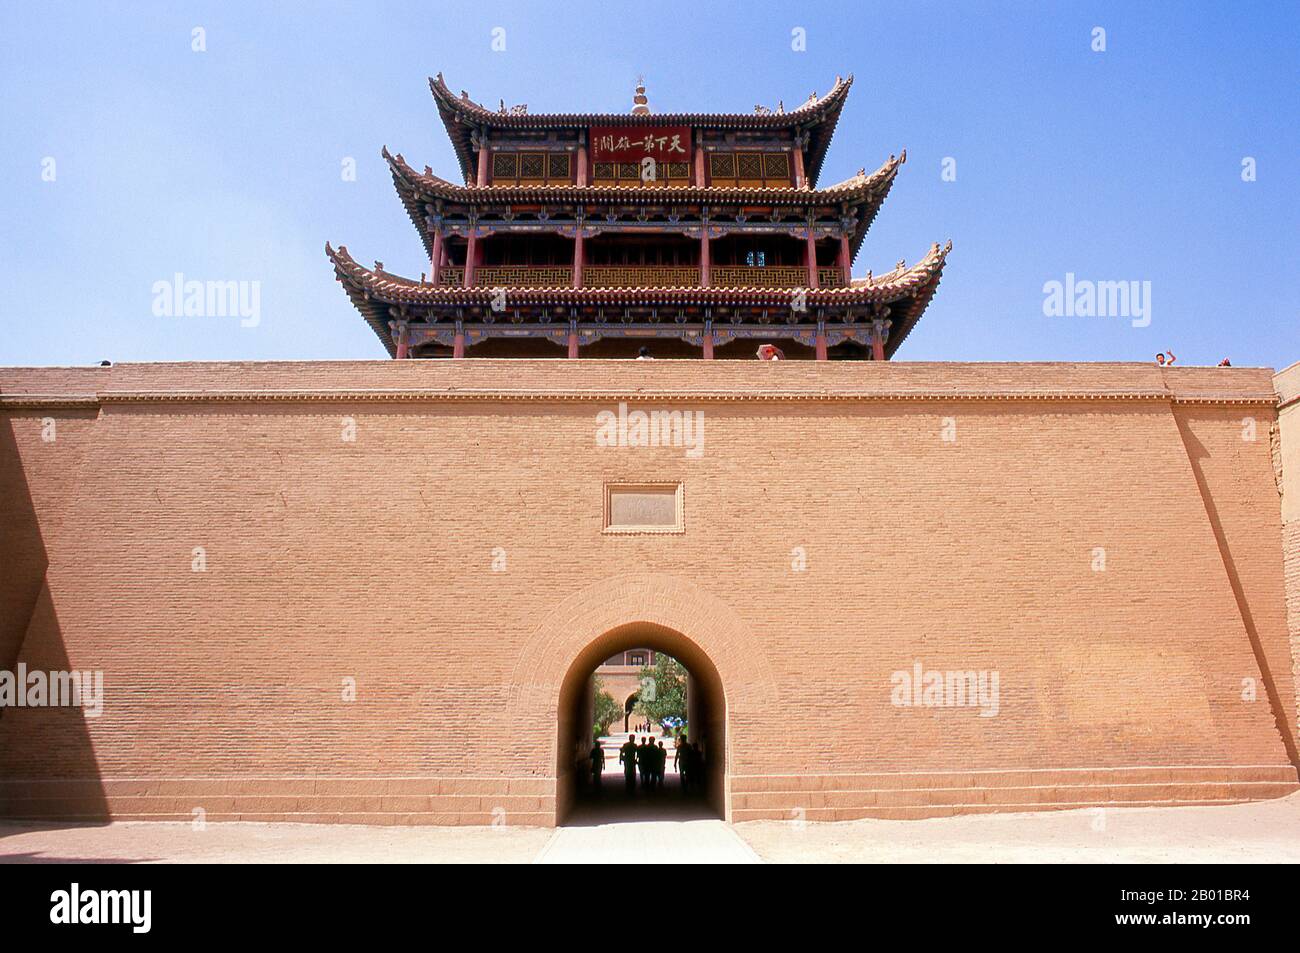 China: Guanghua Men (Gate of Enlightenment), Jiayuguan Fort, Jiayuguan, Gansu.  Jiayuguan, the ‘First and Greatest Pass under Heaven’, was completed in 1372 on the orders of Zhu Yuanzhang, the first Ming Emperor (1368-98), to mark the end of the Ming Great Wall. It was also the very limits of Chinese civilisation, and the beginnings of the outer ‘barbarian’ lands.  For centuries the fort was not just of strategic importance to Han Chinese, but of cultural significance as well. This was the last civilised place before the outer darkness, and those proceeding beyond faced a life of exile. Stock Photo